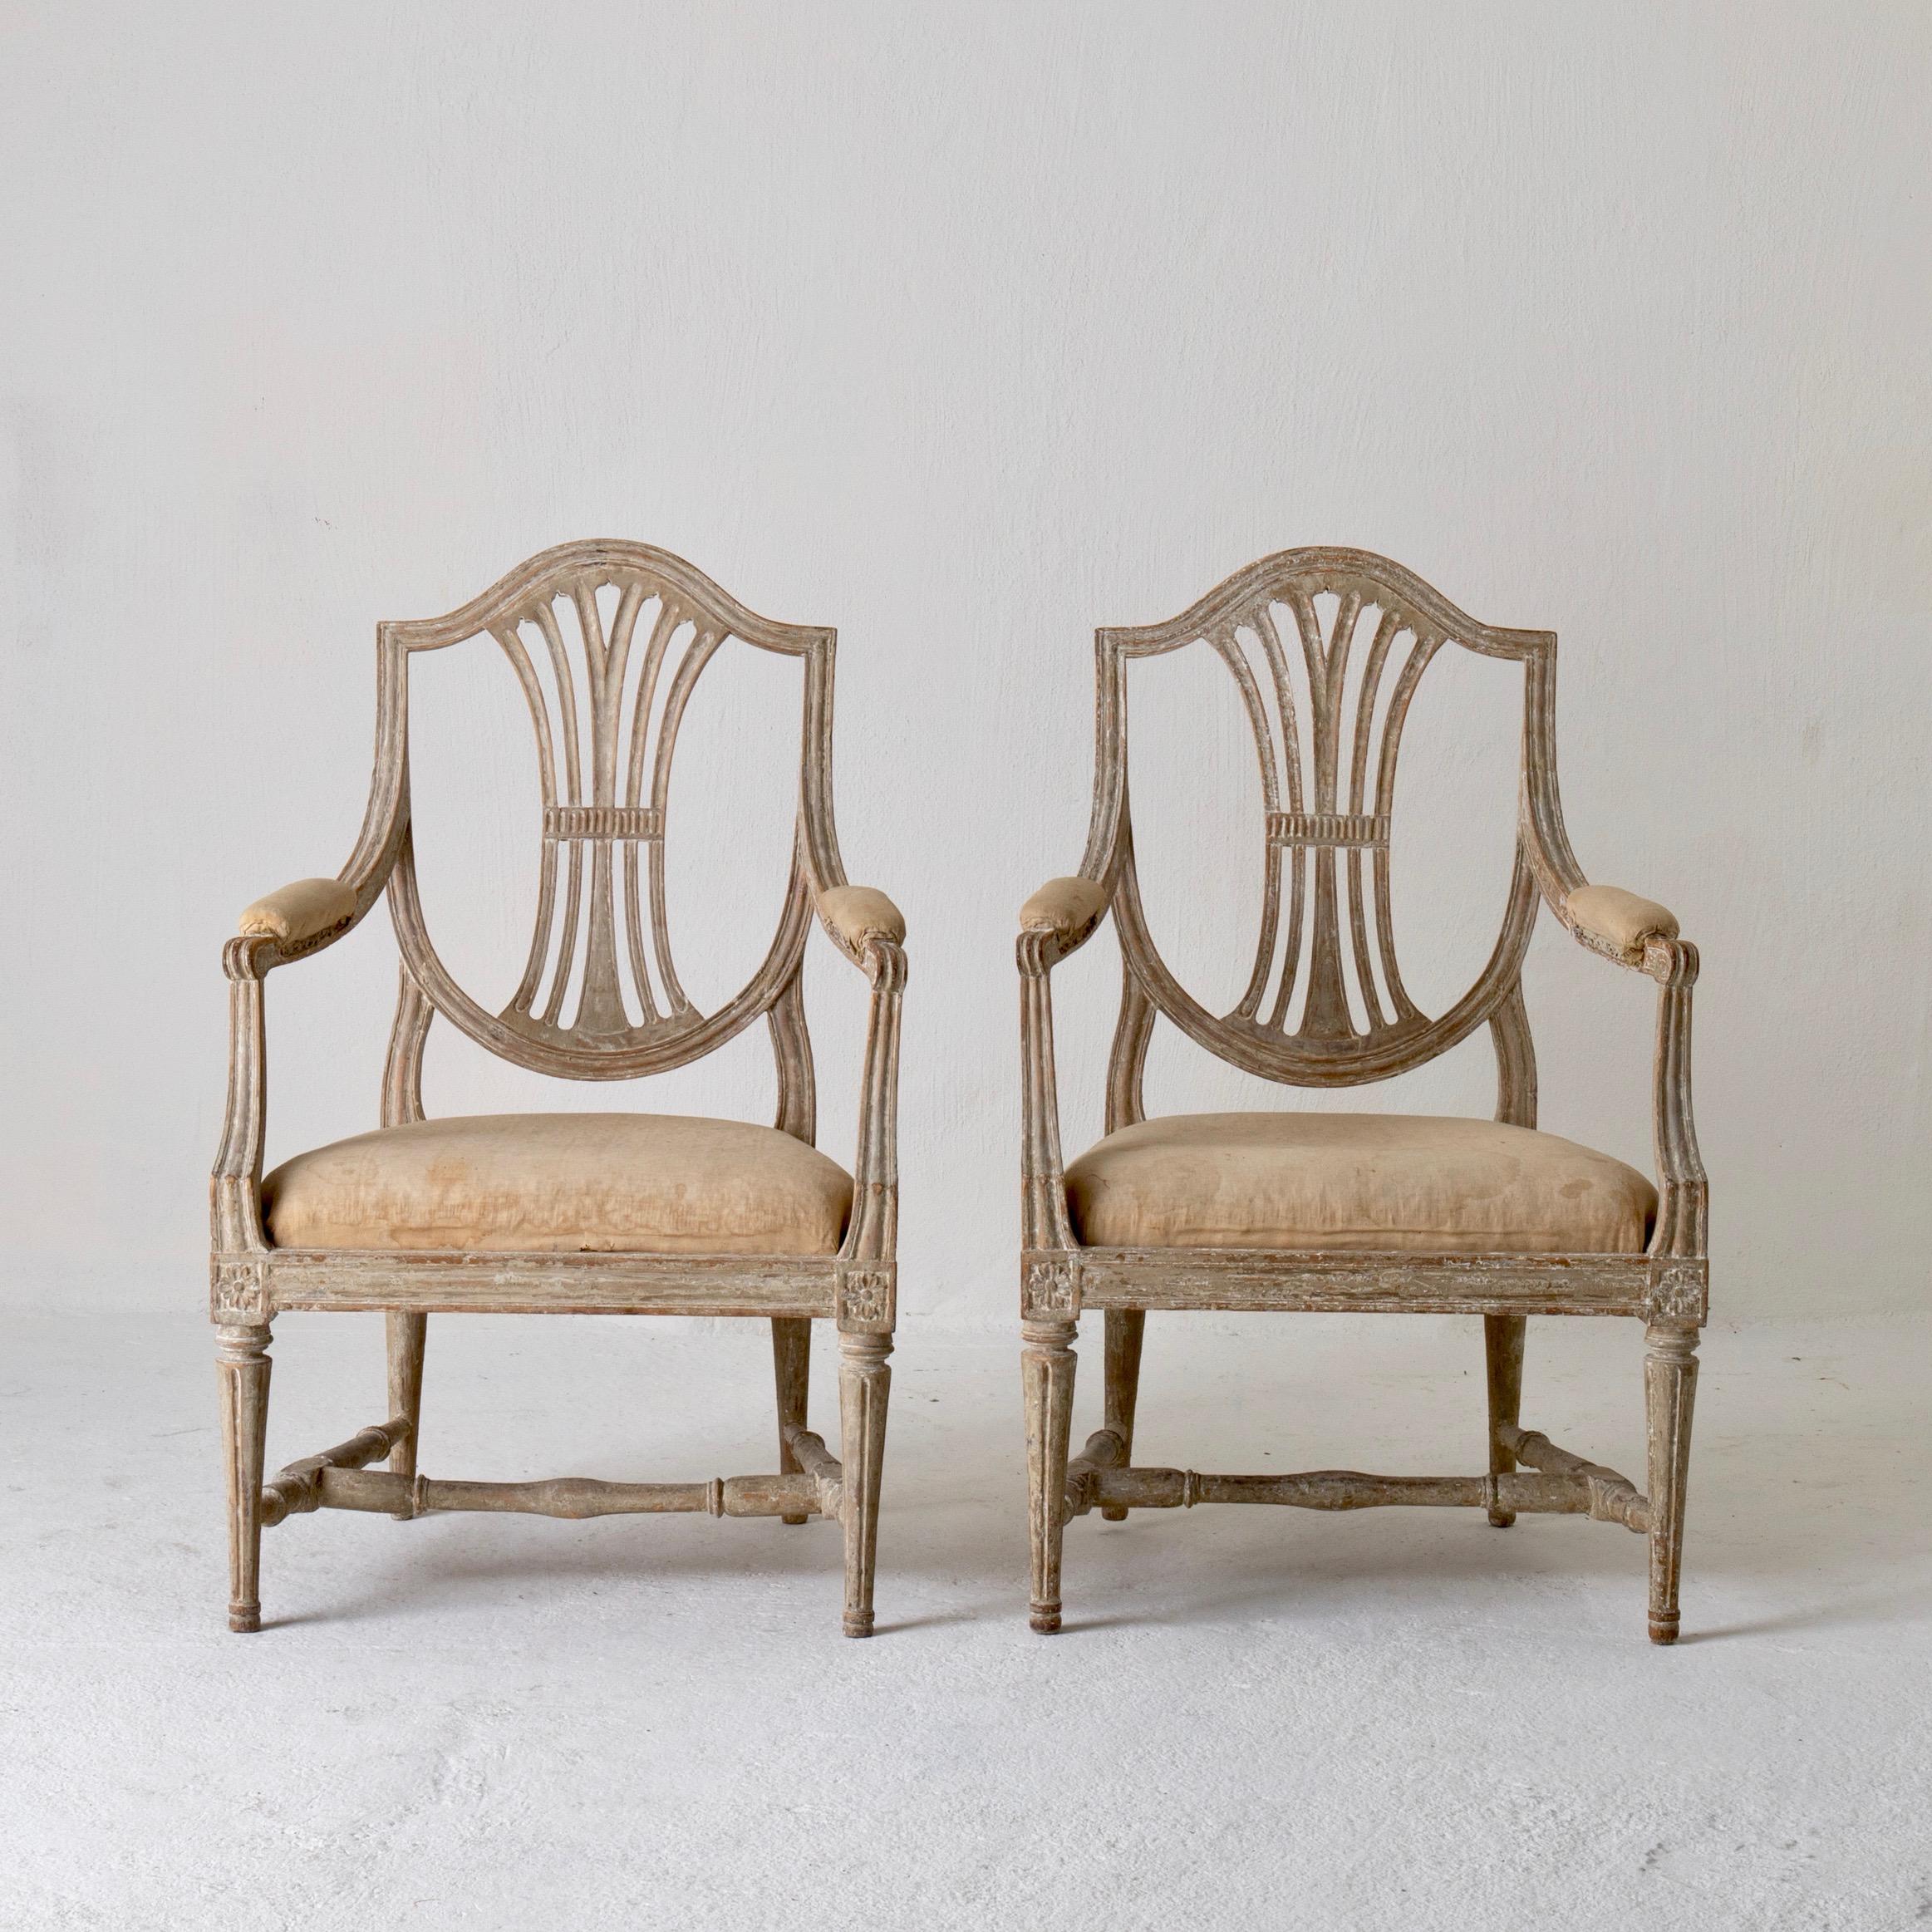 Hand-Painted Armchairs Pair of Swedish Gustavian Period Original Paint Sweden